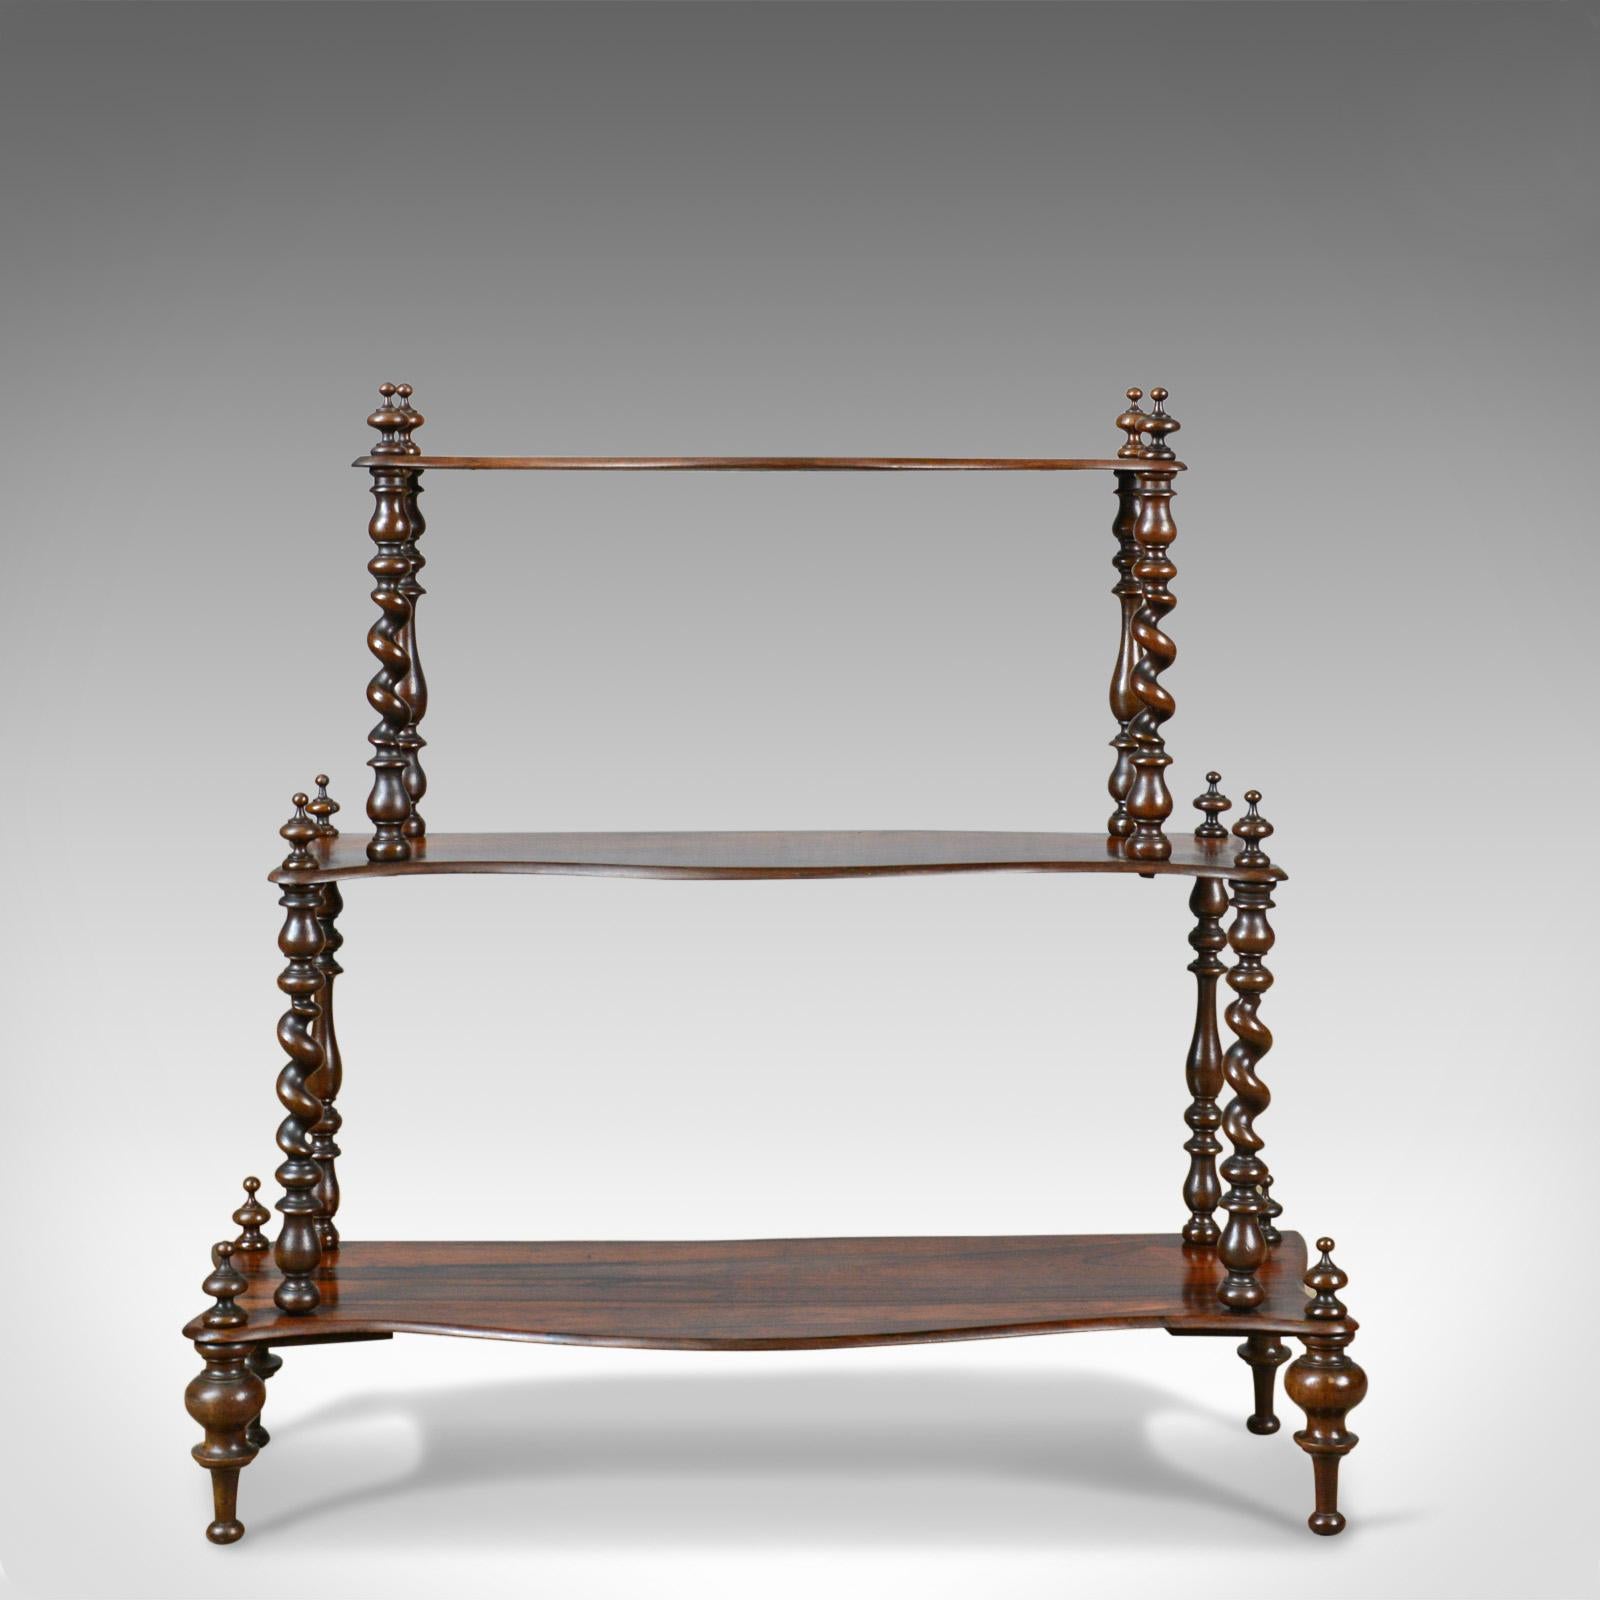 This is an antique whatnot, an English, Regency, rosewood, three tier display stand dating the early 19th century circa 1820.

Attractive, well figured rosewood, graduated shelves
Serpentine display shelves in waterfall form
Good colour